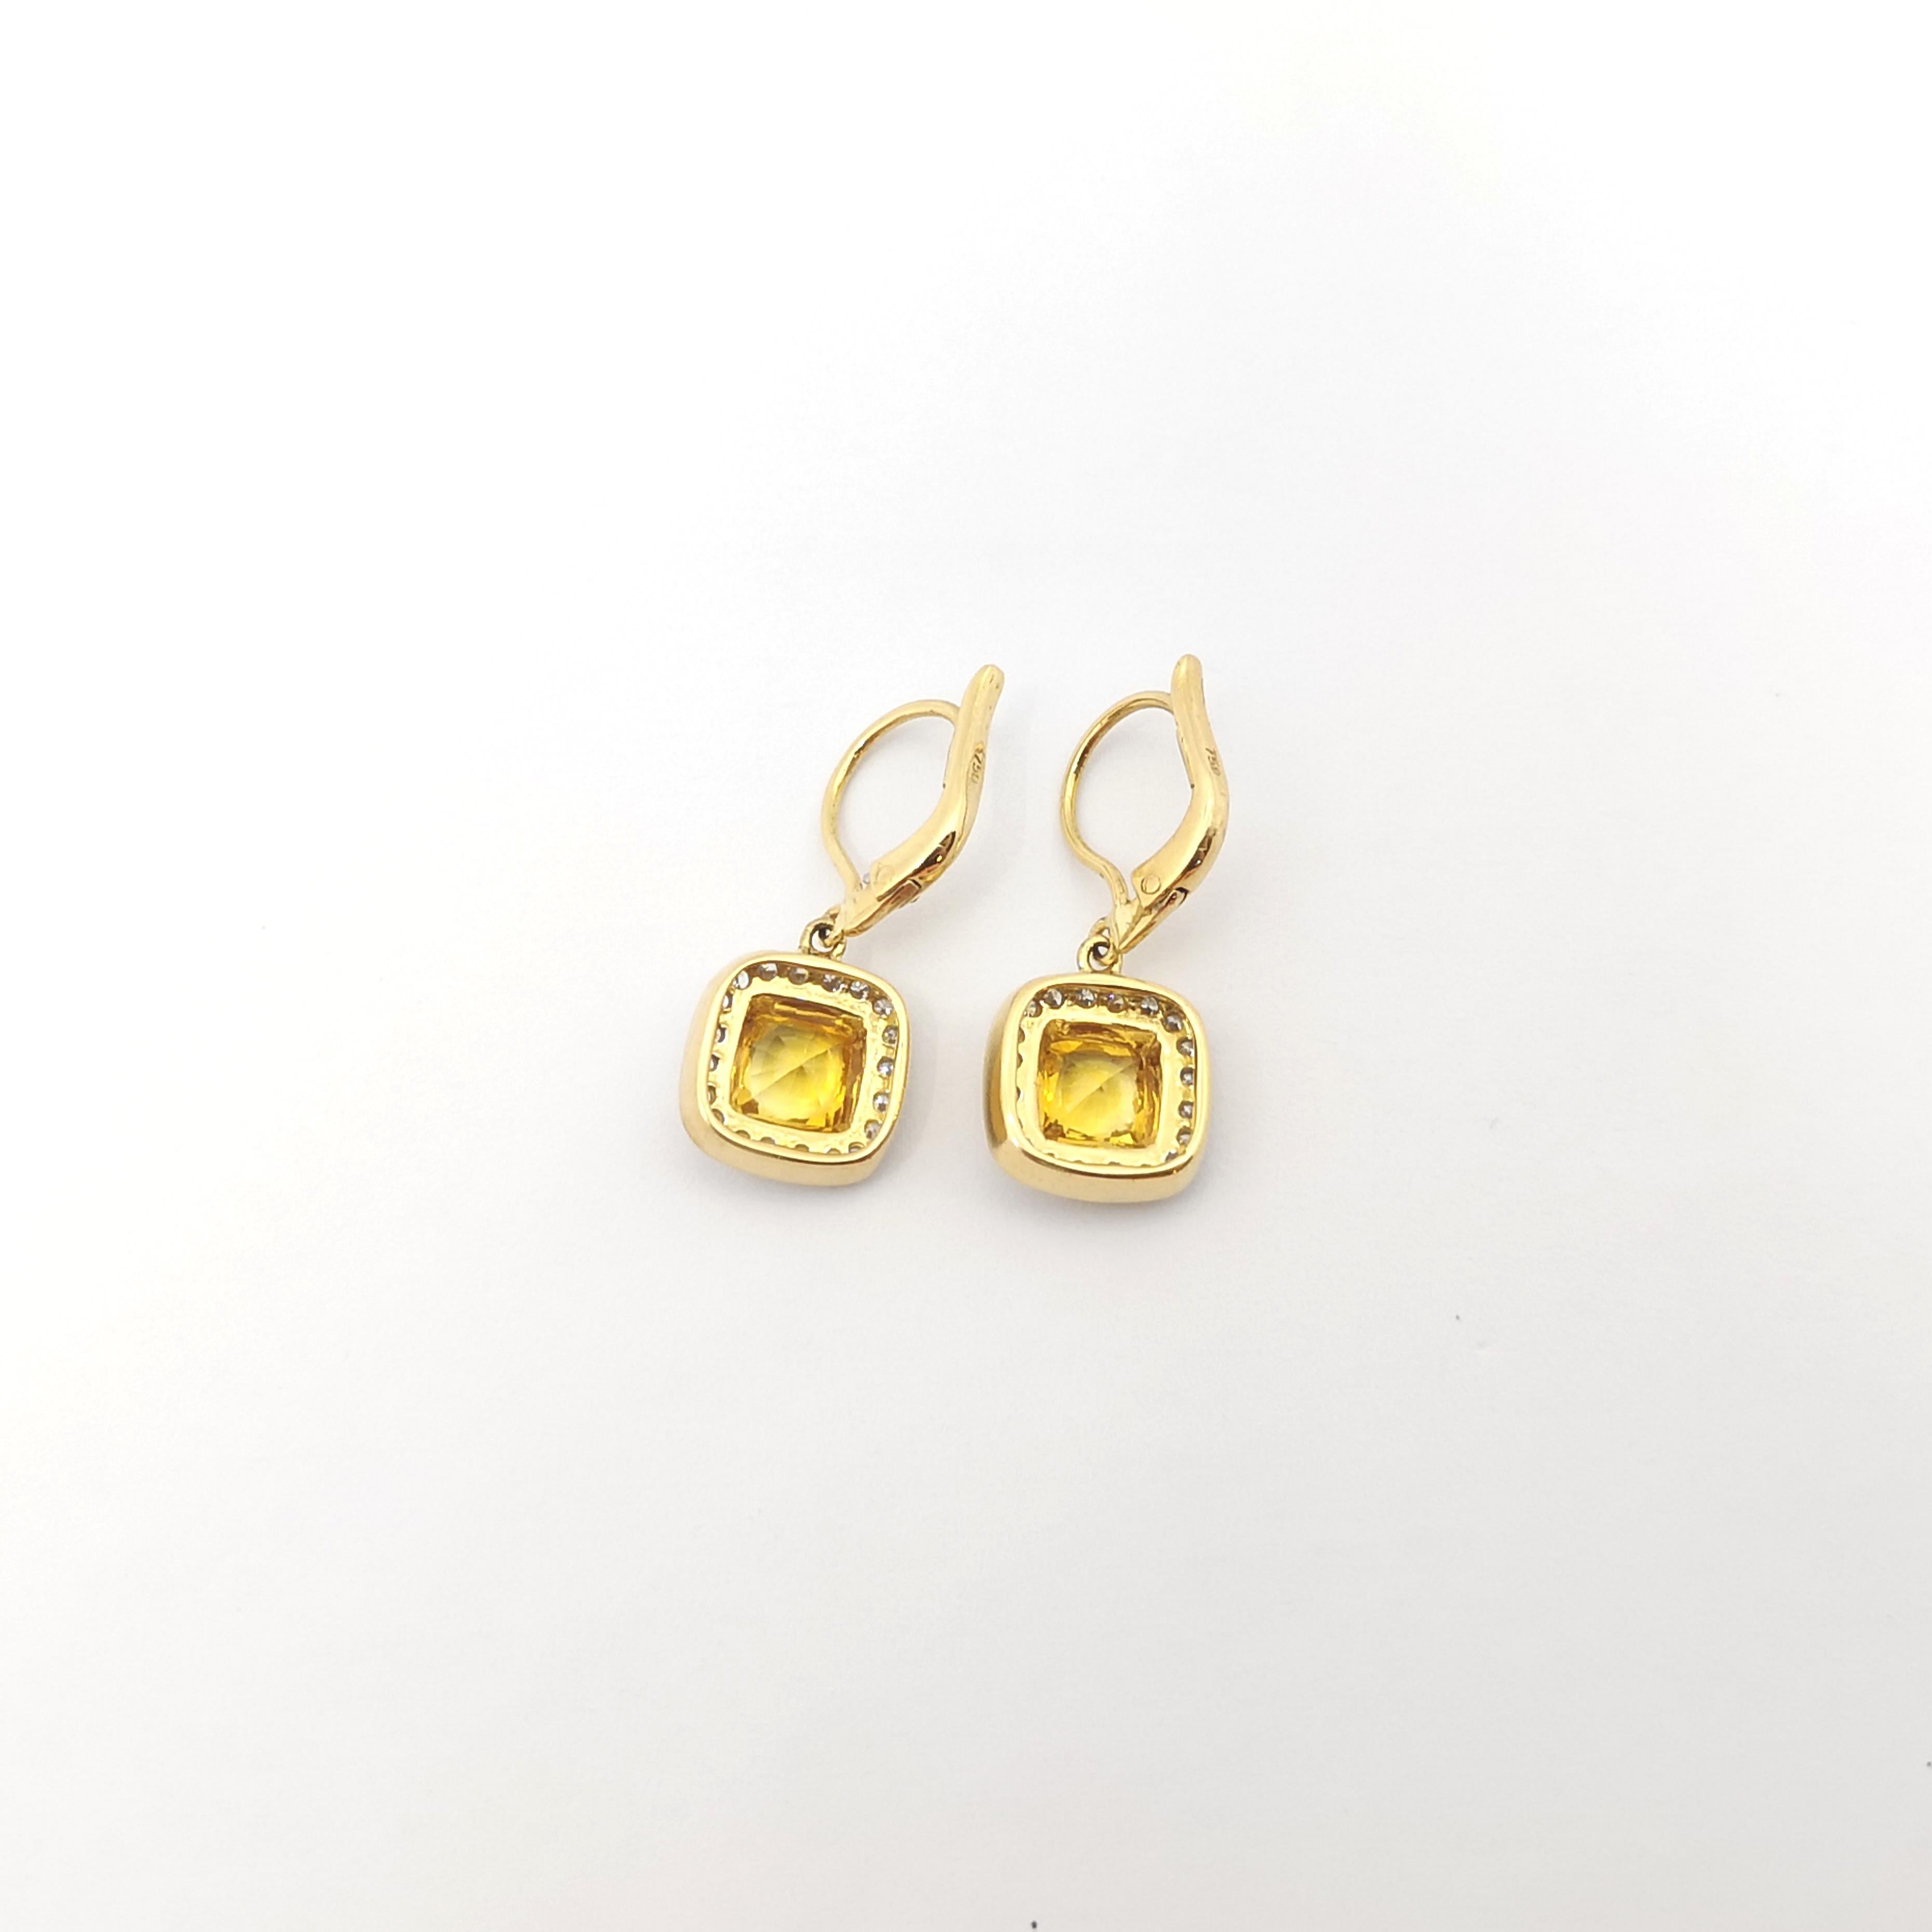 Yellow Sapphire 2.17 carats with Diamond 0.38 carat Earrings set in 18K Gold Set For Sale 3